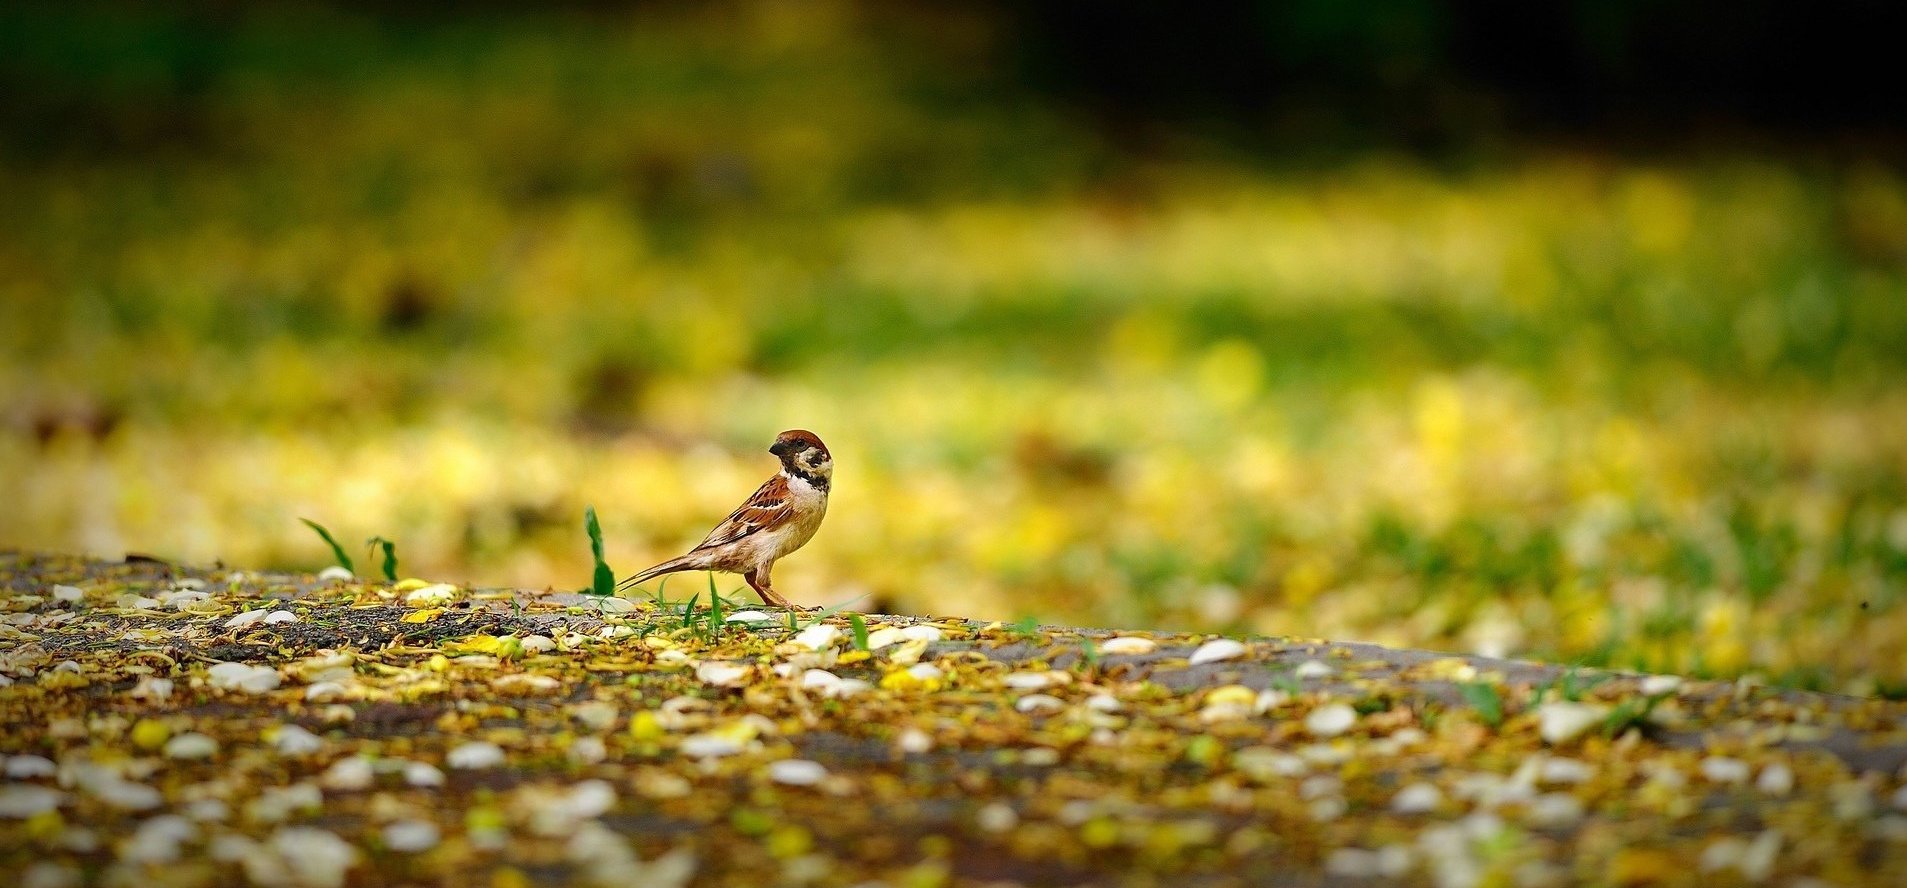 Animals Poultry Sparrow Nature Yellow Blur Birds